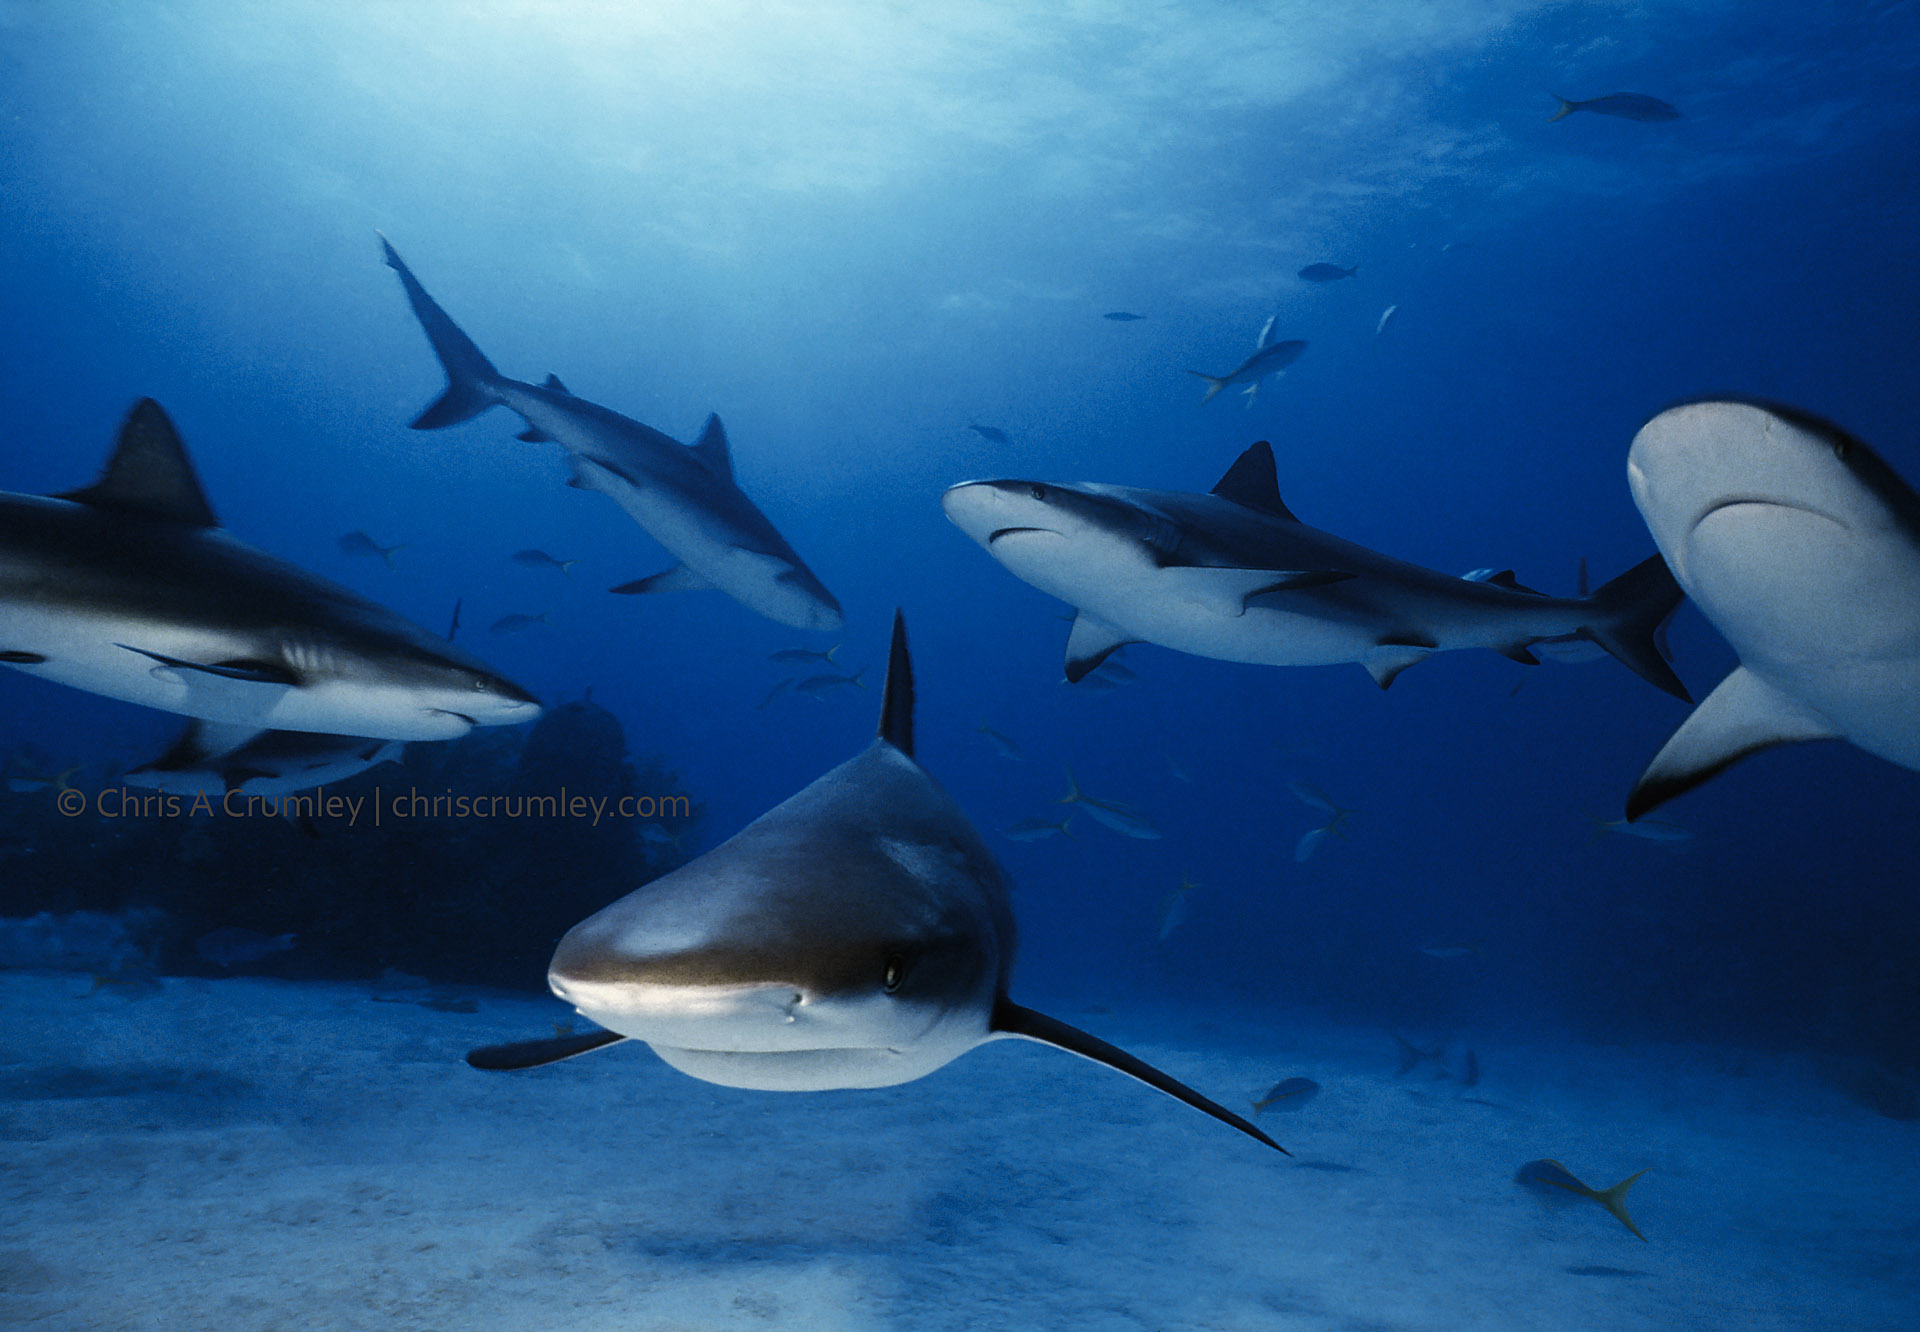 Underwater Photography and Conservation Efforts